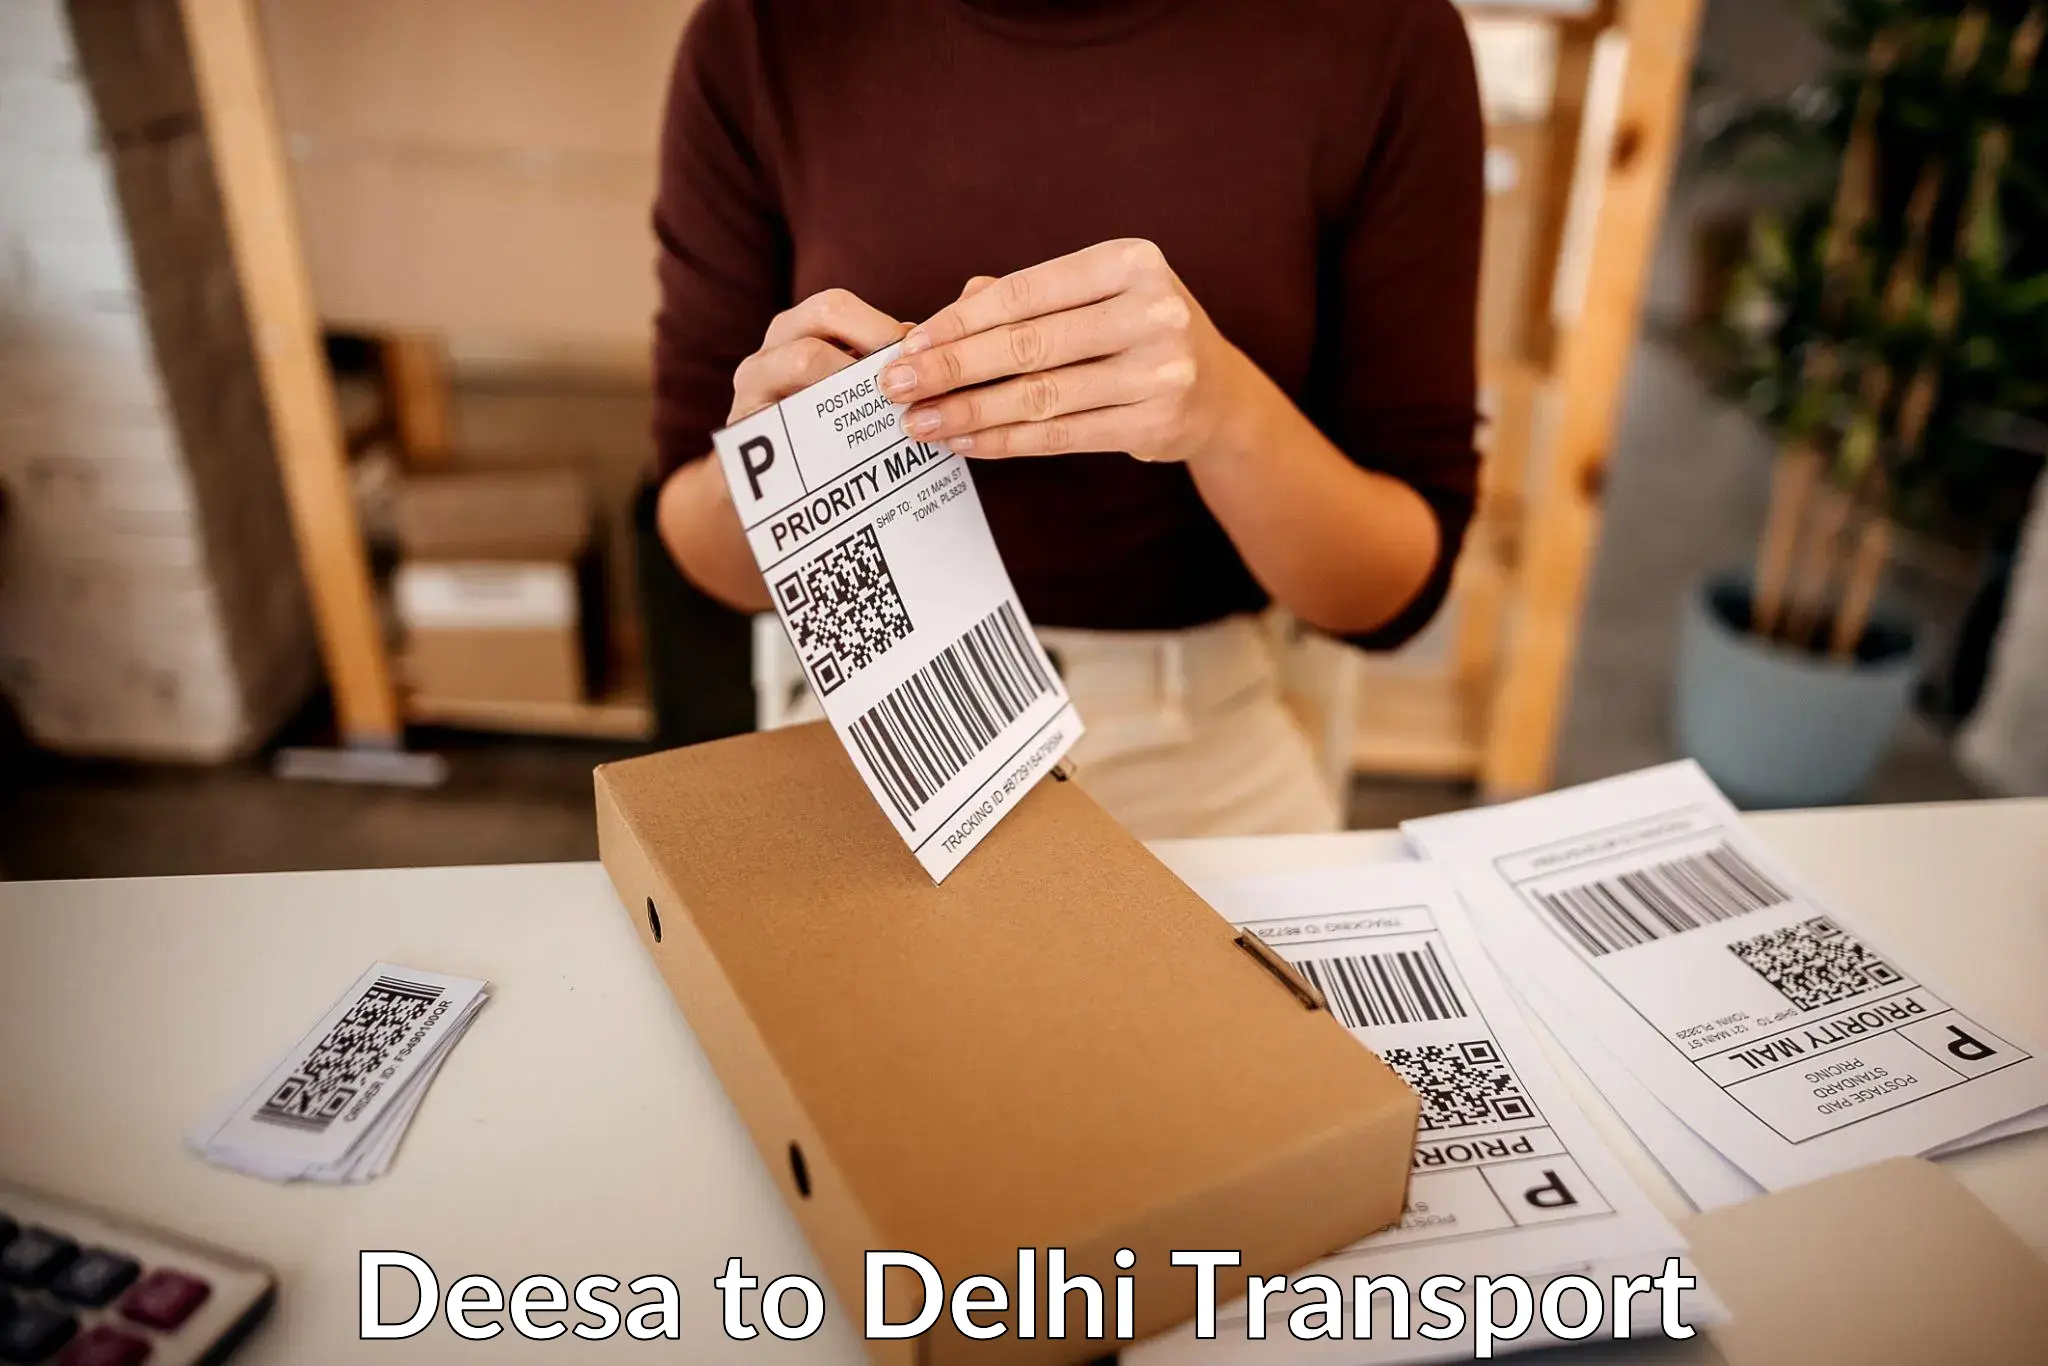 Container transport service Deesa to NCR